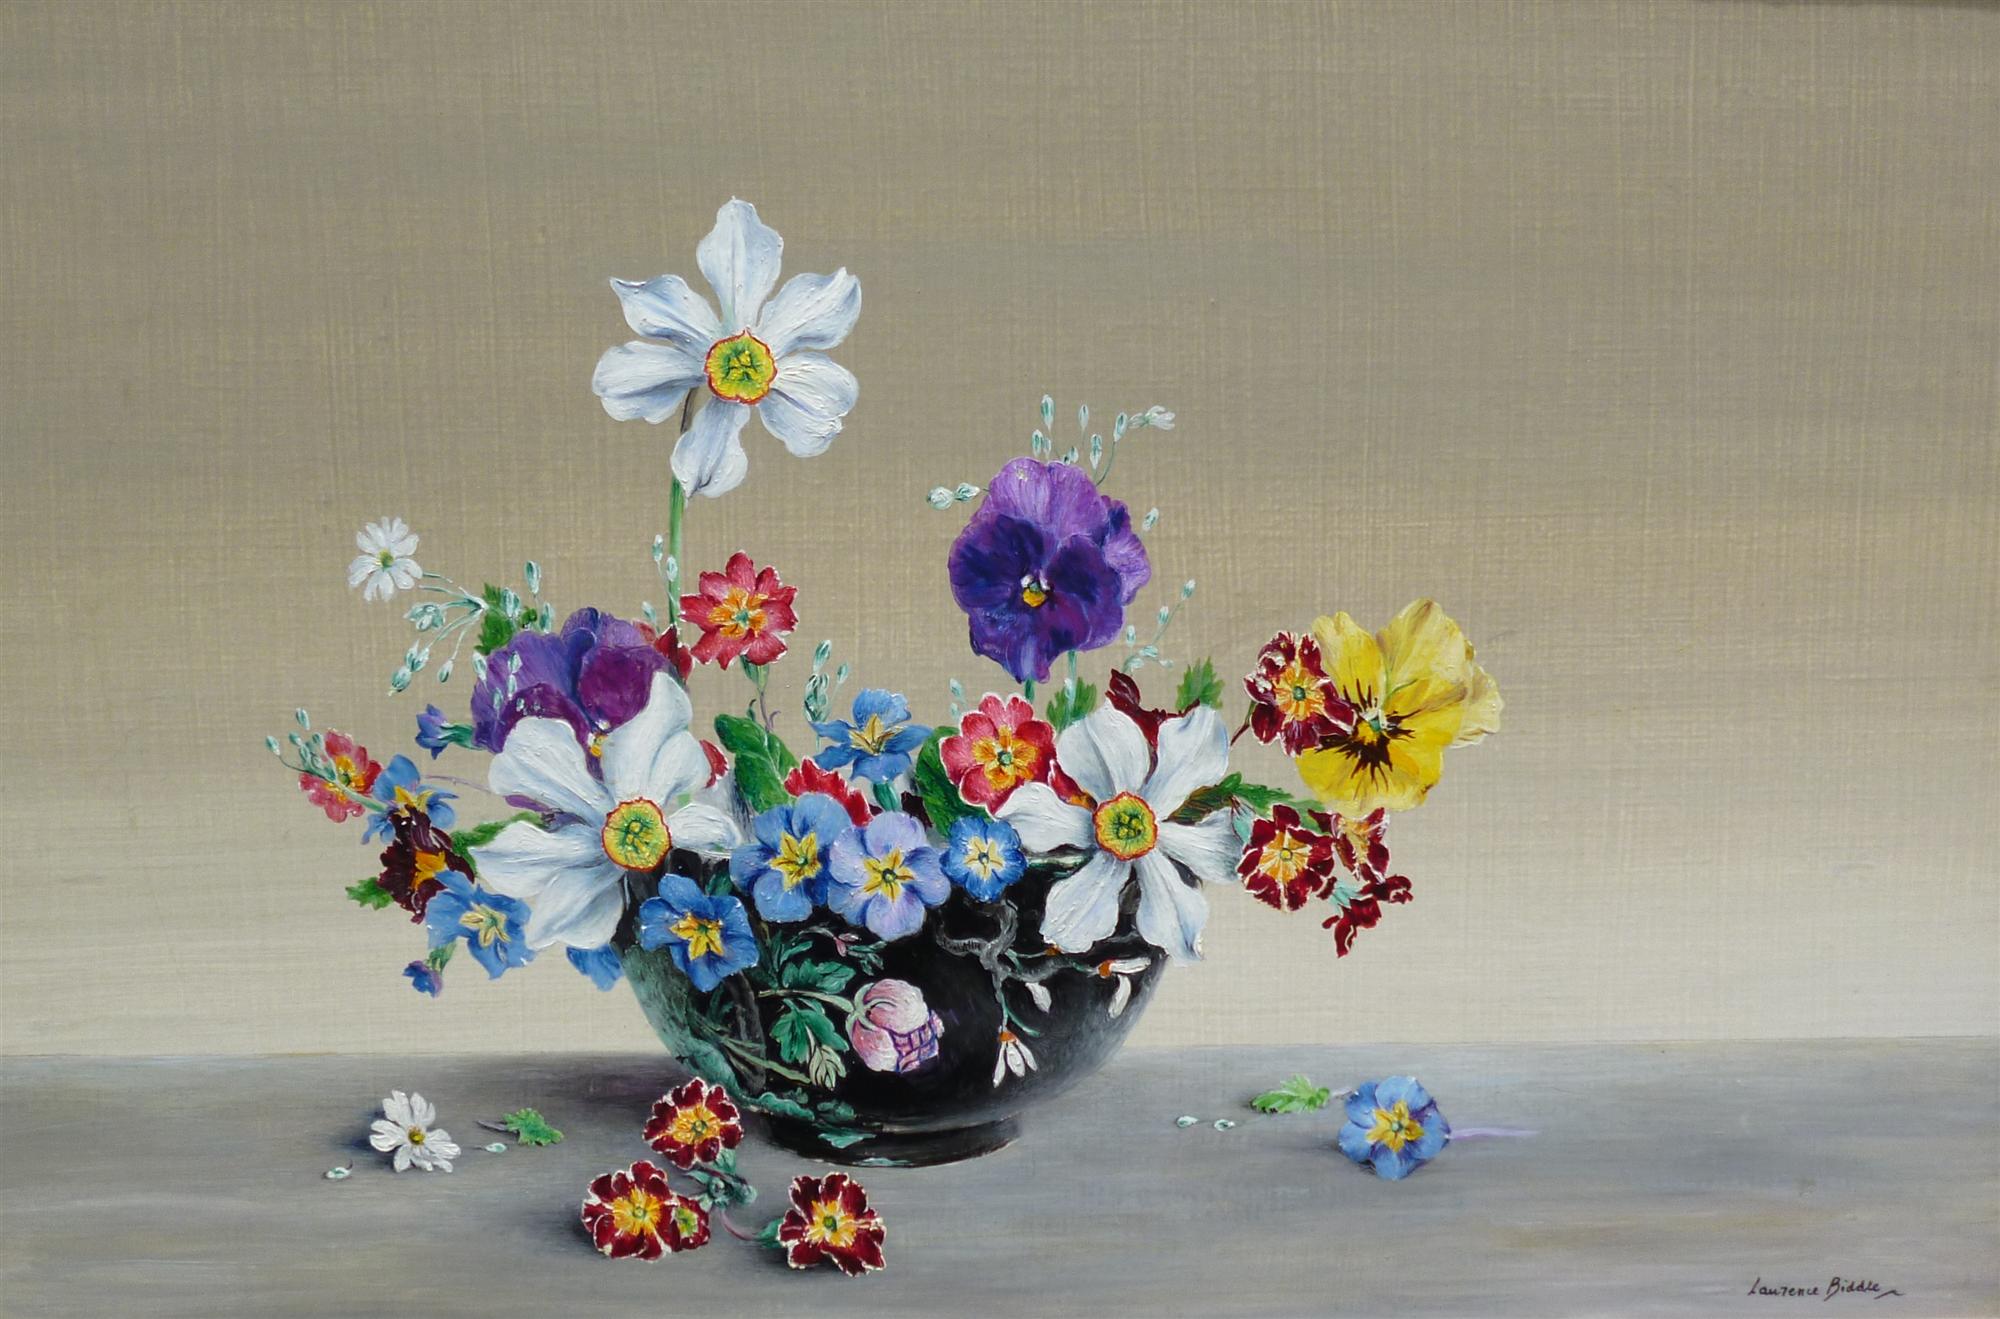 Laurence Biddle | Still Life with Flowers